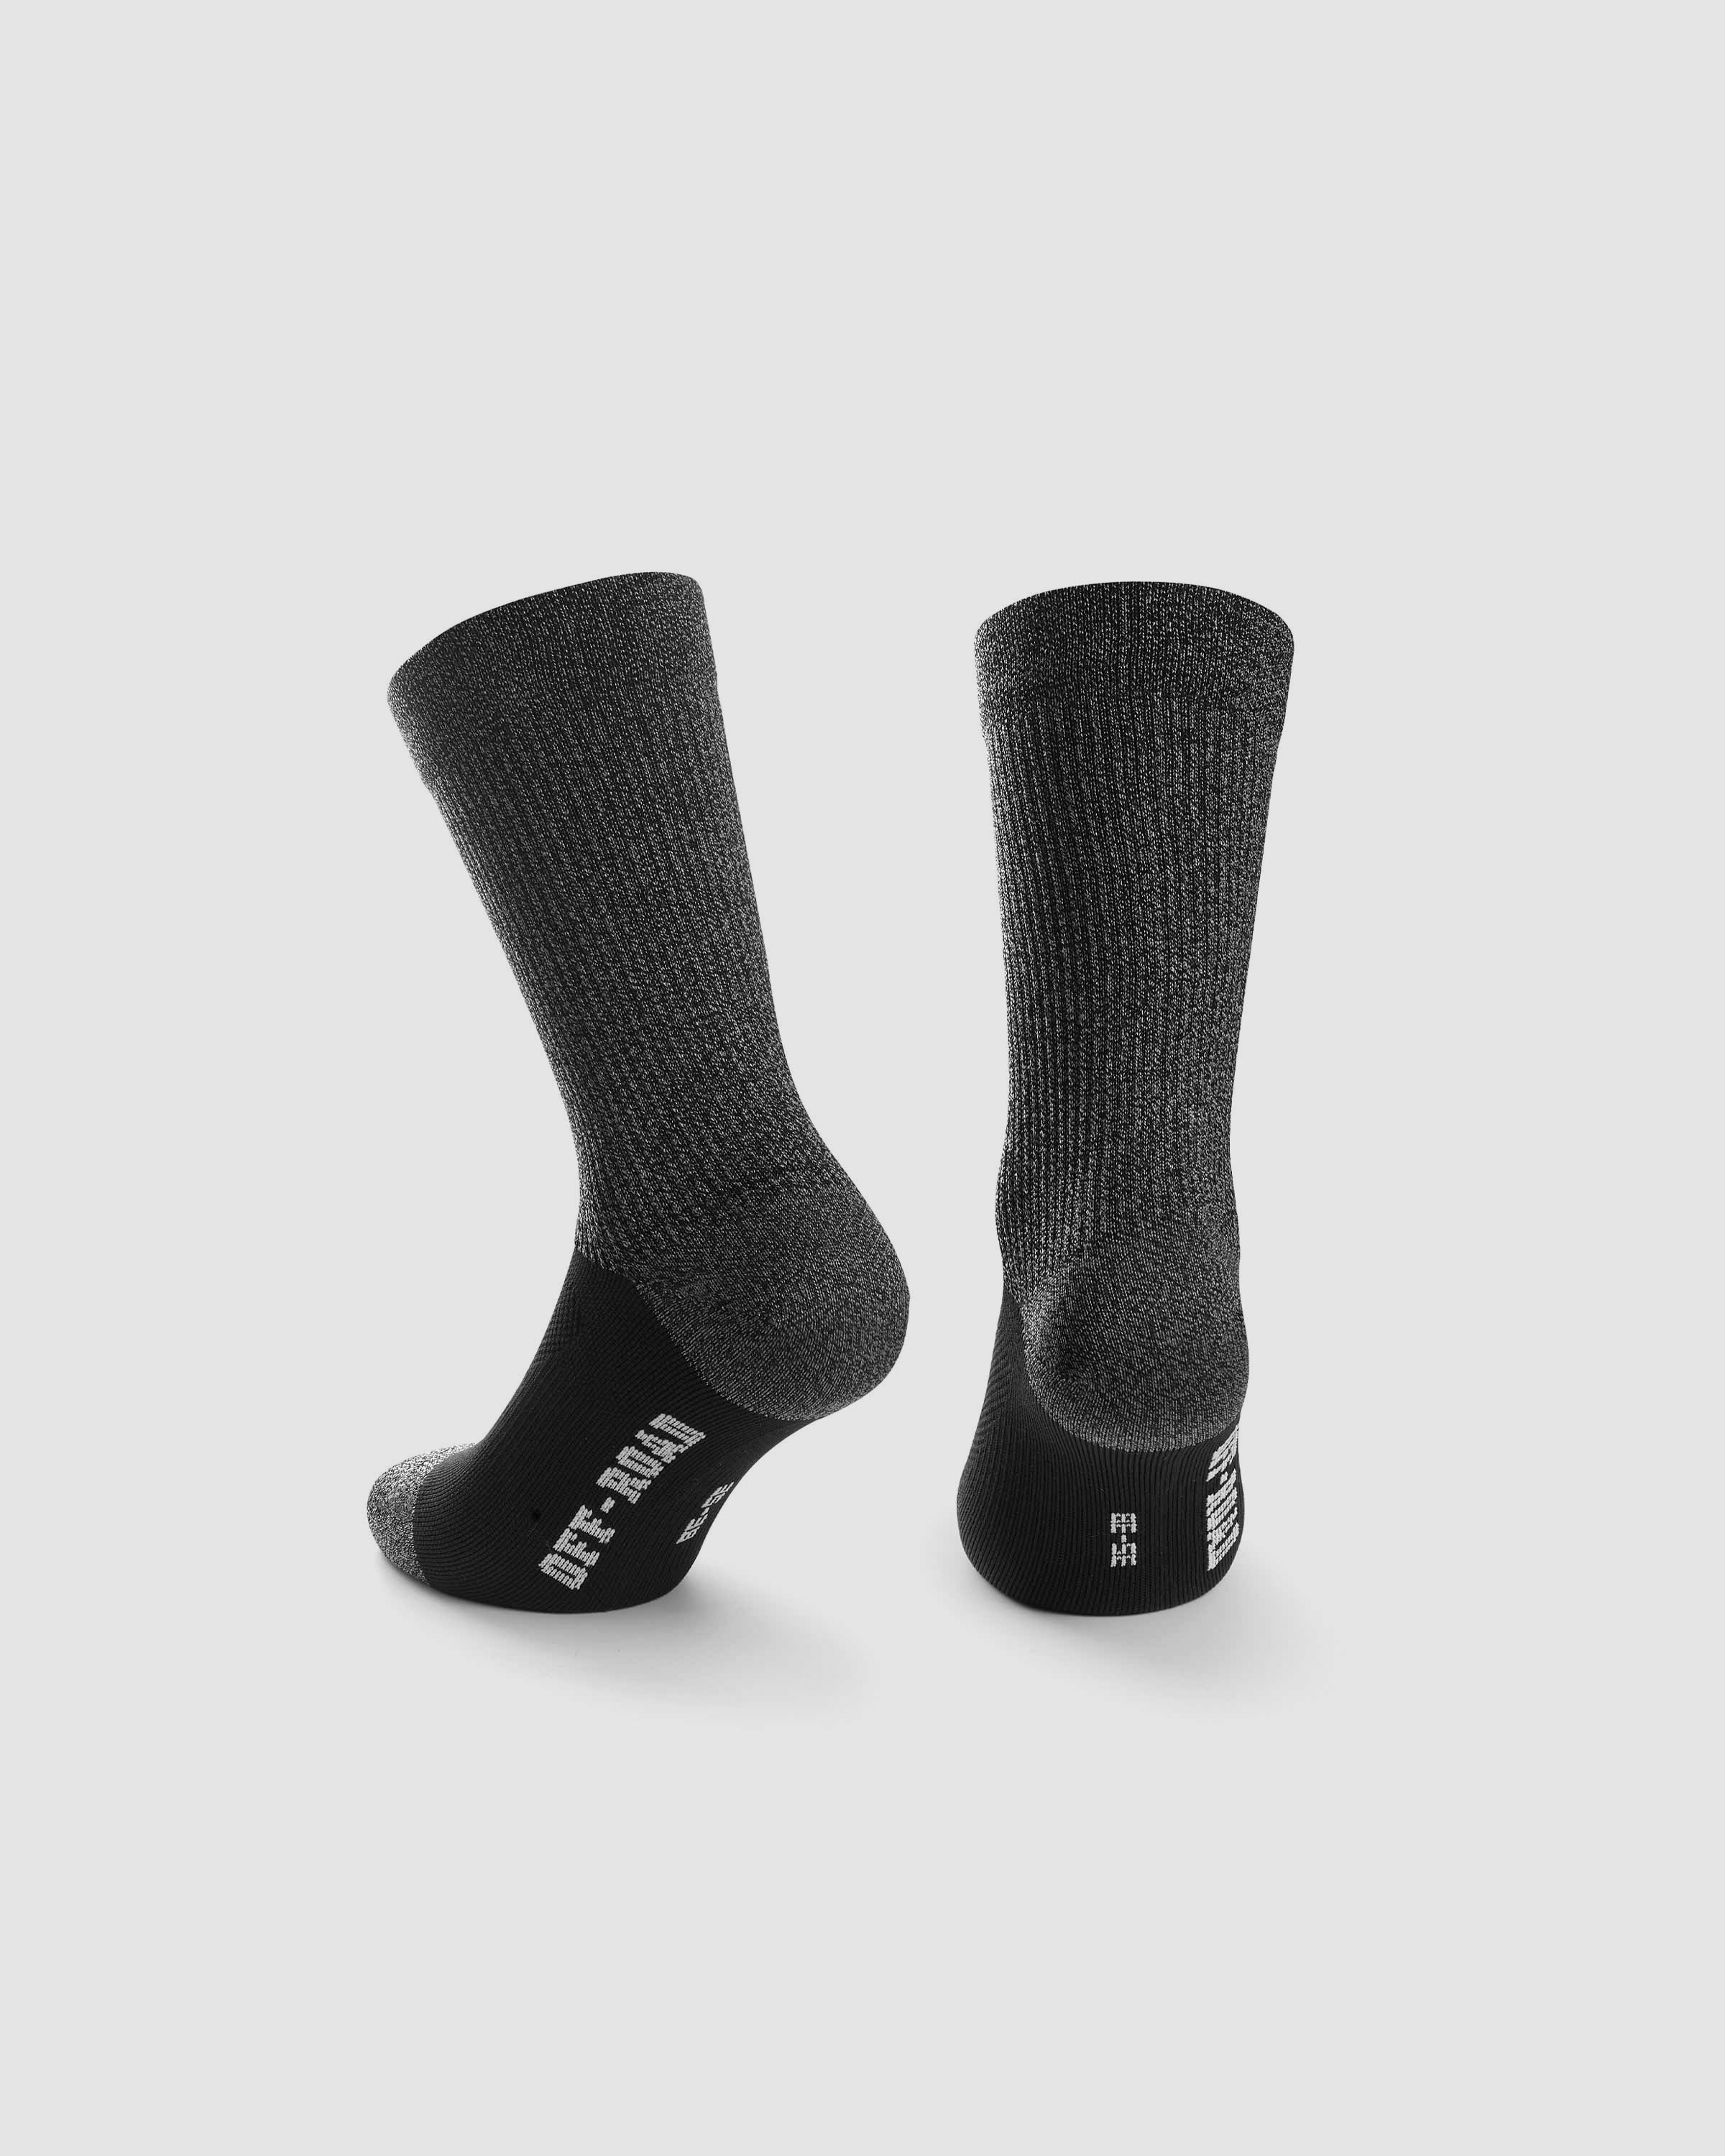 TRAIL Socks - ASSOS Of Switzerland - Official Outlet